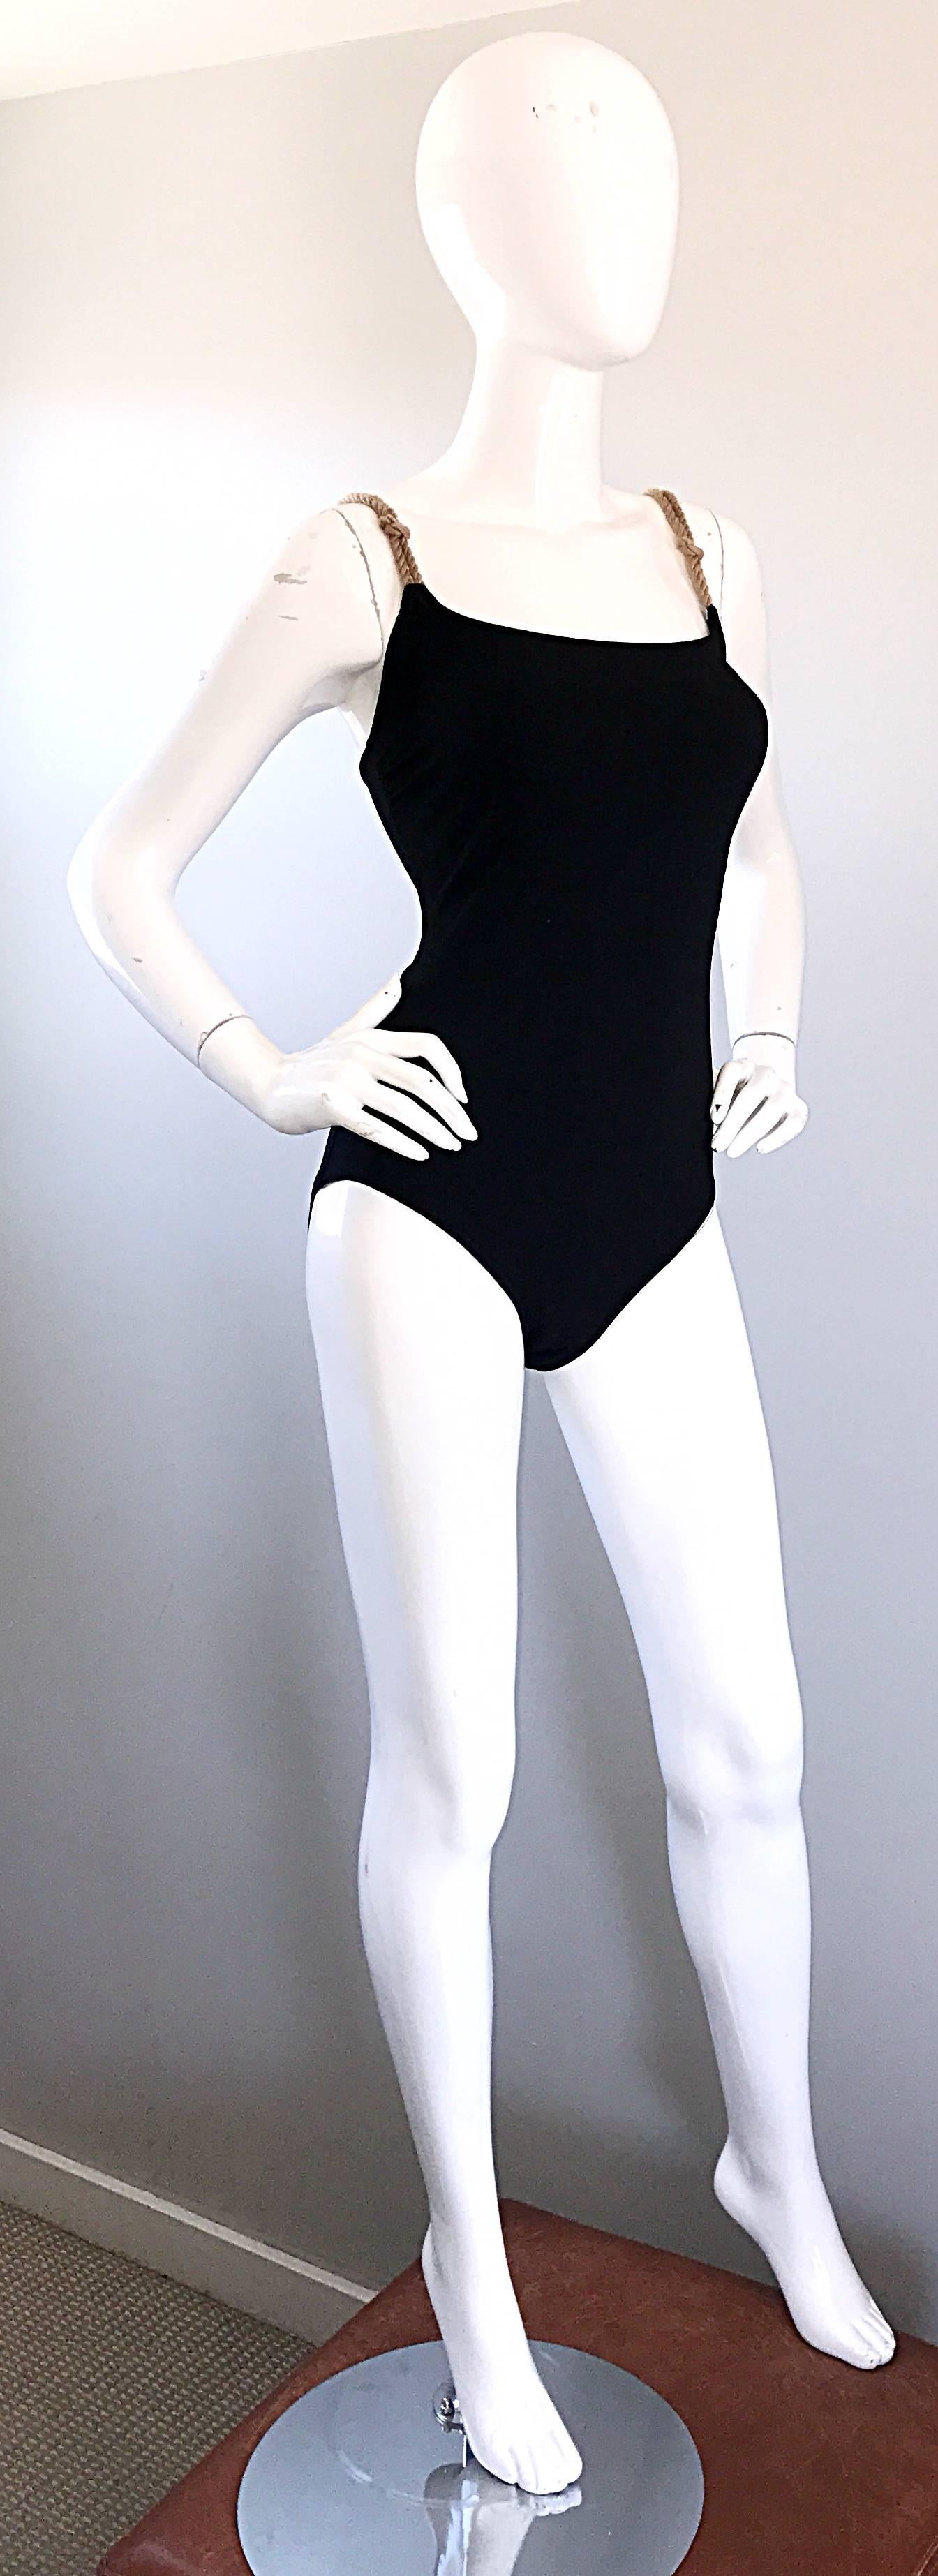 1990s Bill Blass Rope Strap Black Nautical One Piece Vintage Swimsuit Bodysuit In Excellent Condition For Sale In San Diego, CA